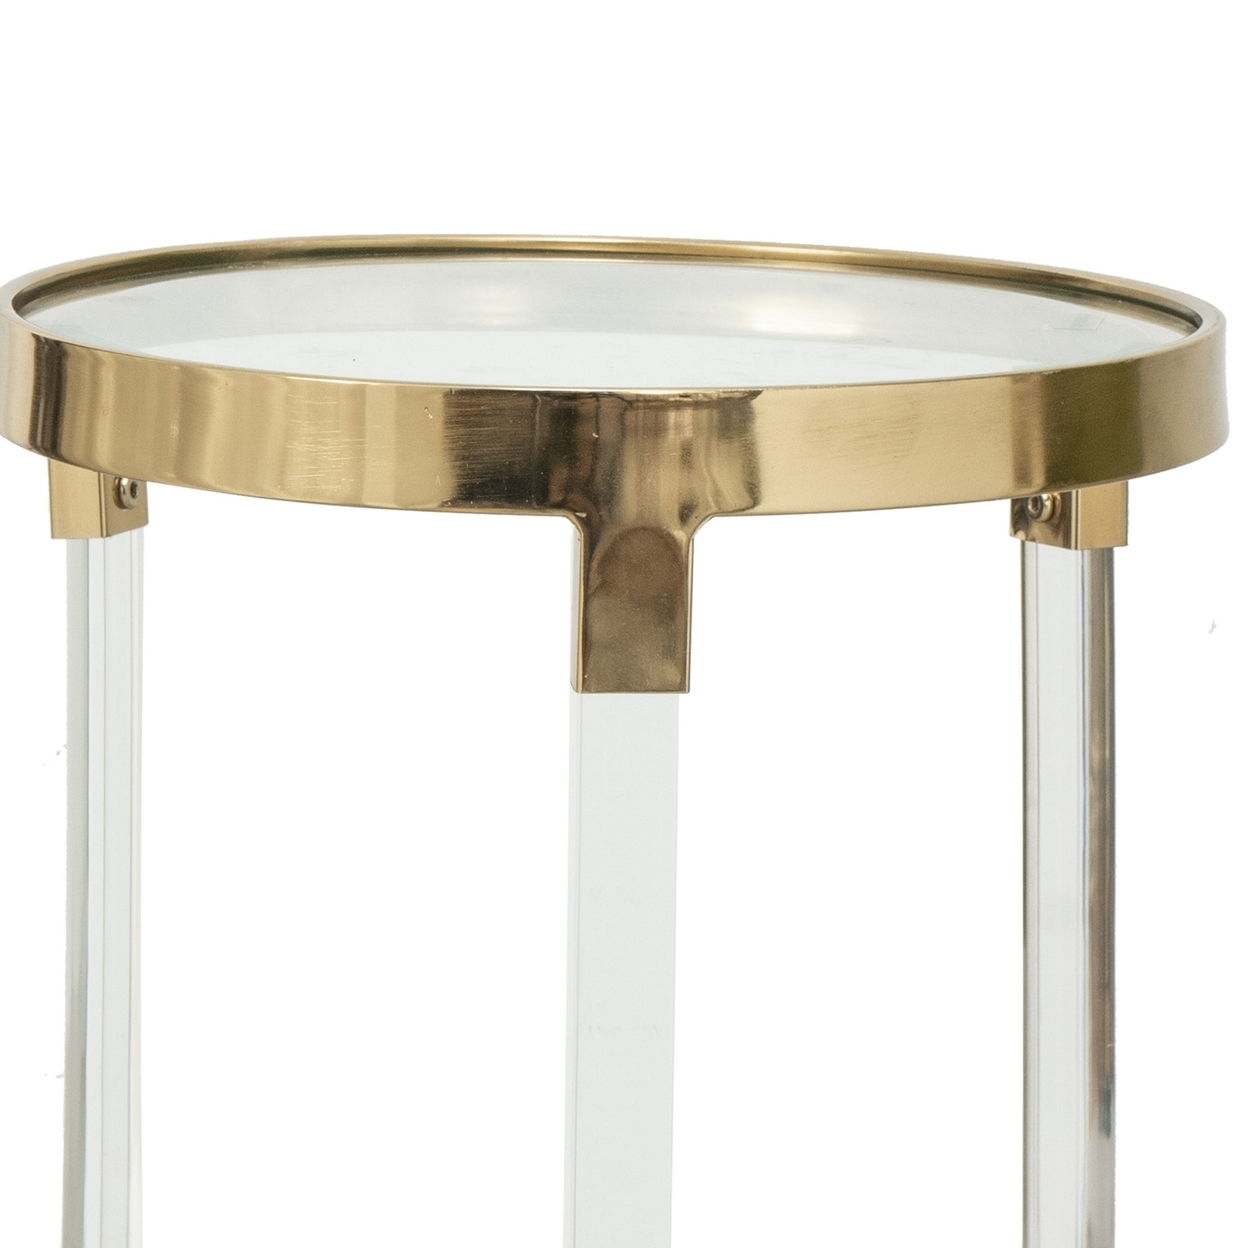 24, 21 Accent Tables, Acrylic Clear Legs, Glass Top, Set Of 2, Gold, Saltoro Sherpi